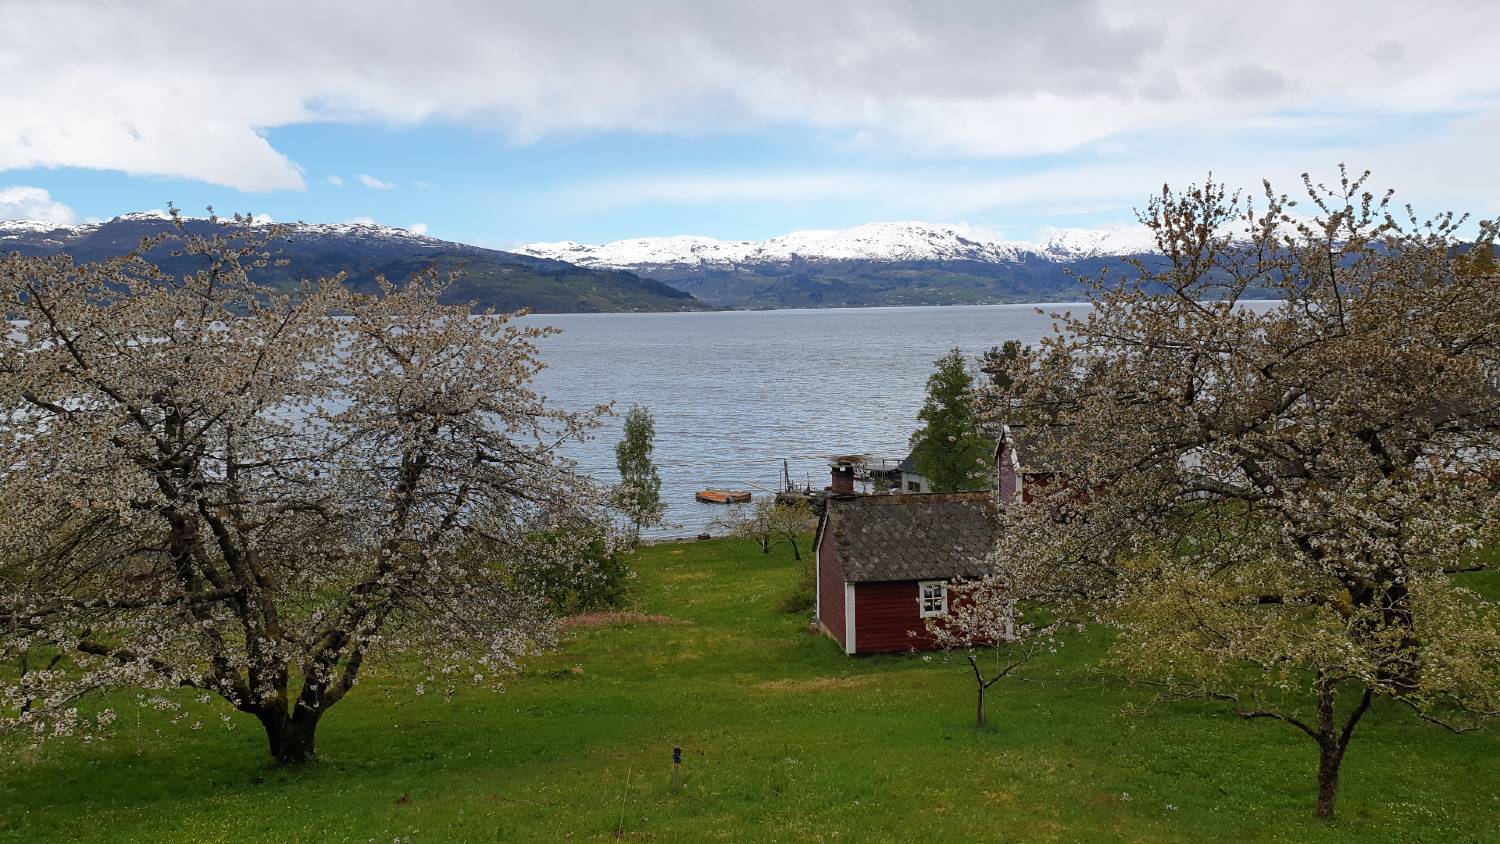 Road trip from Bergen to Hardanger - Norway's orchard